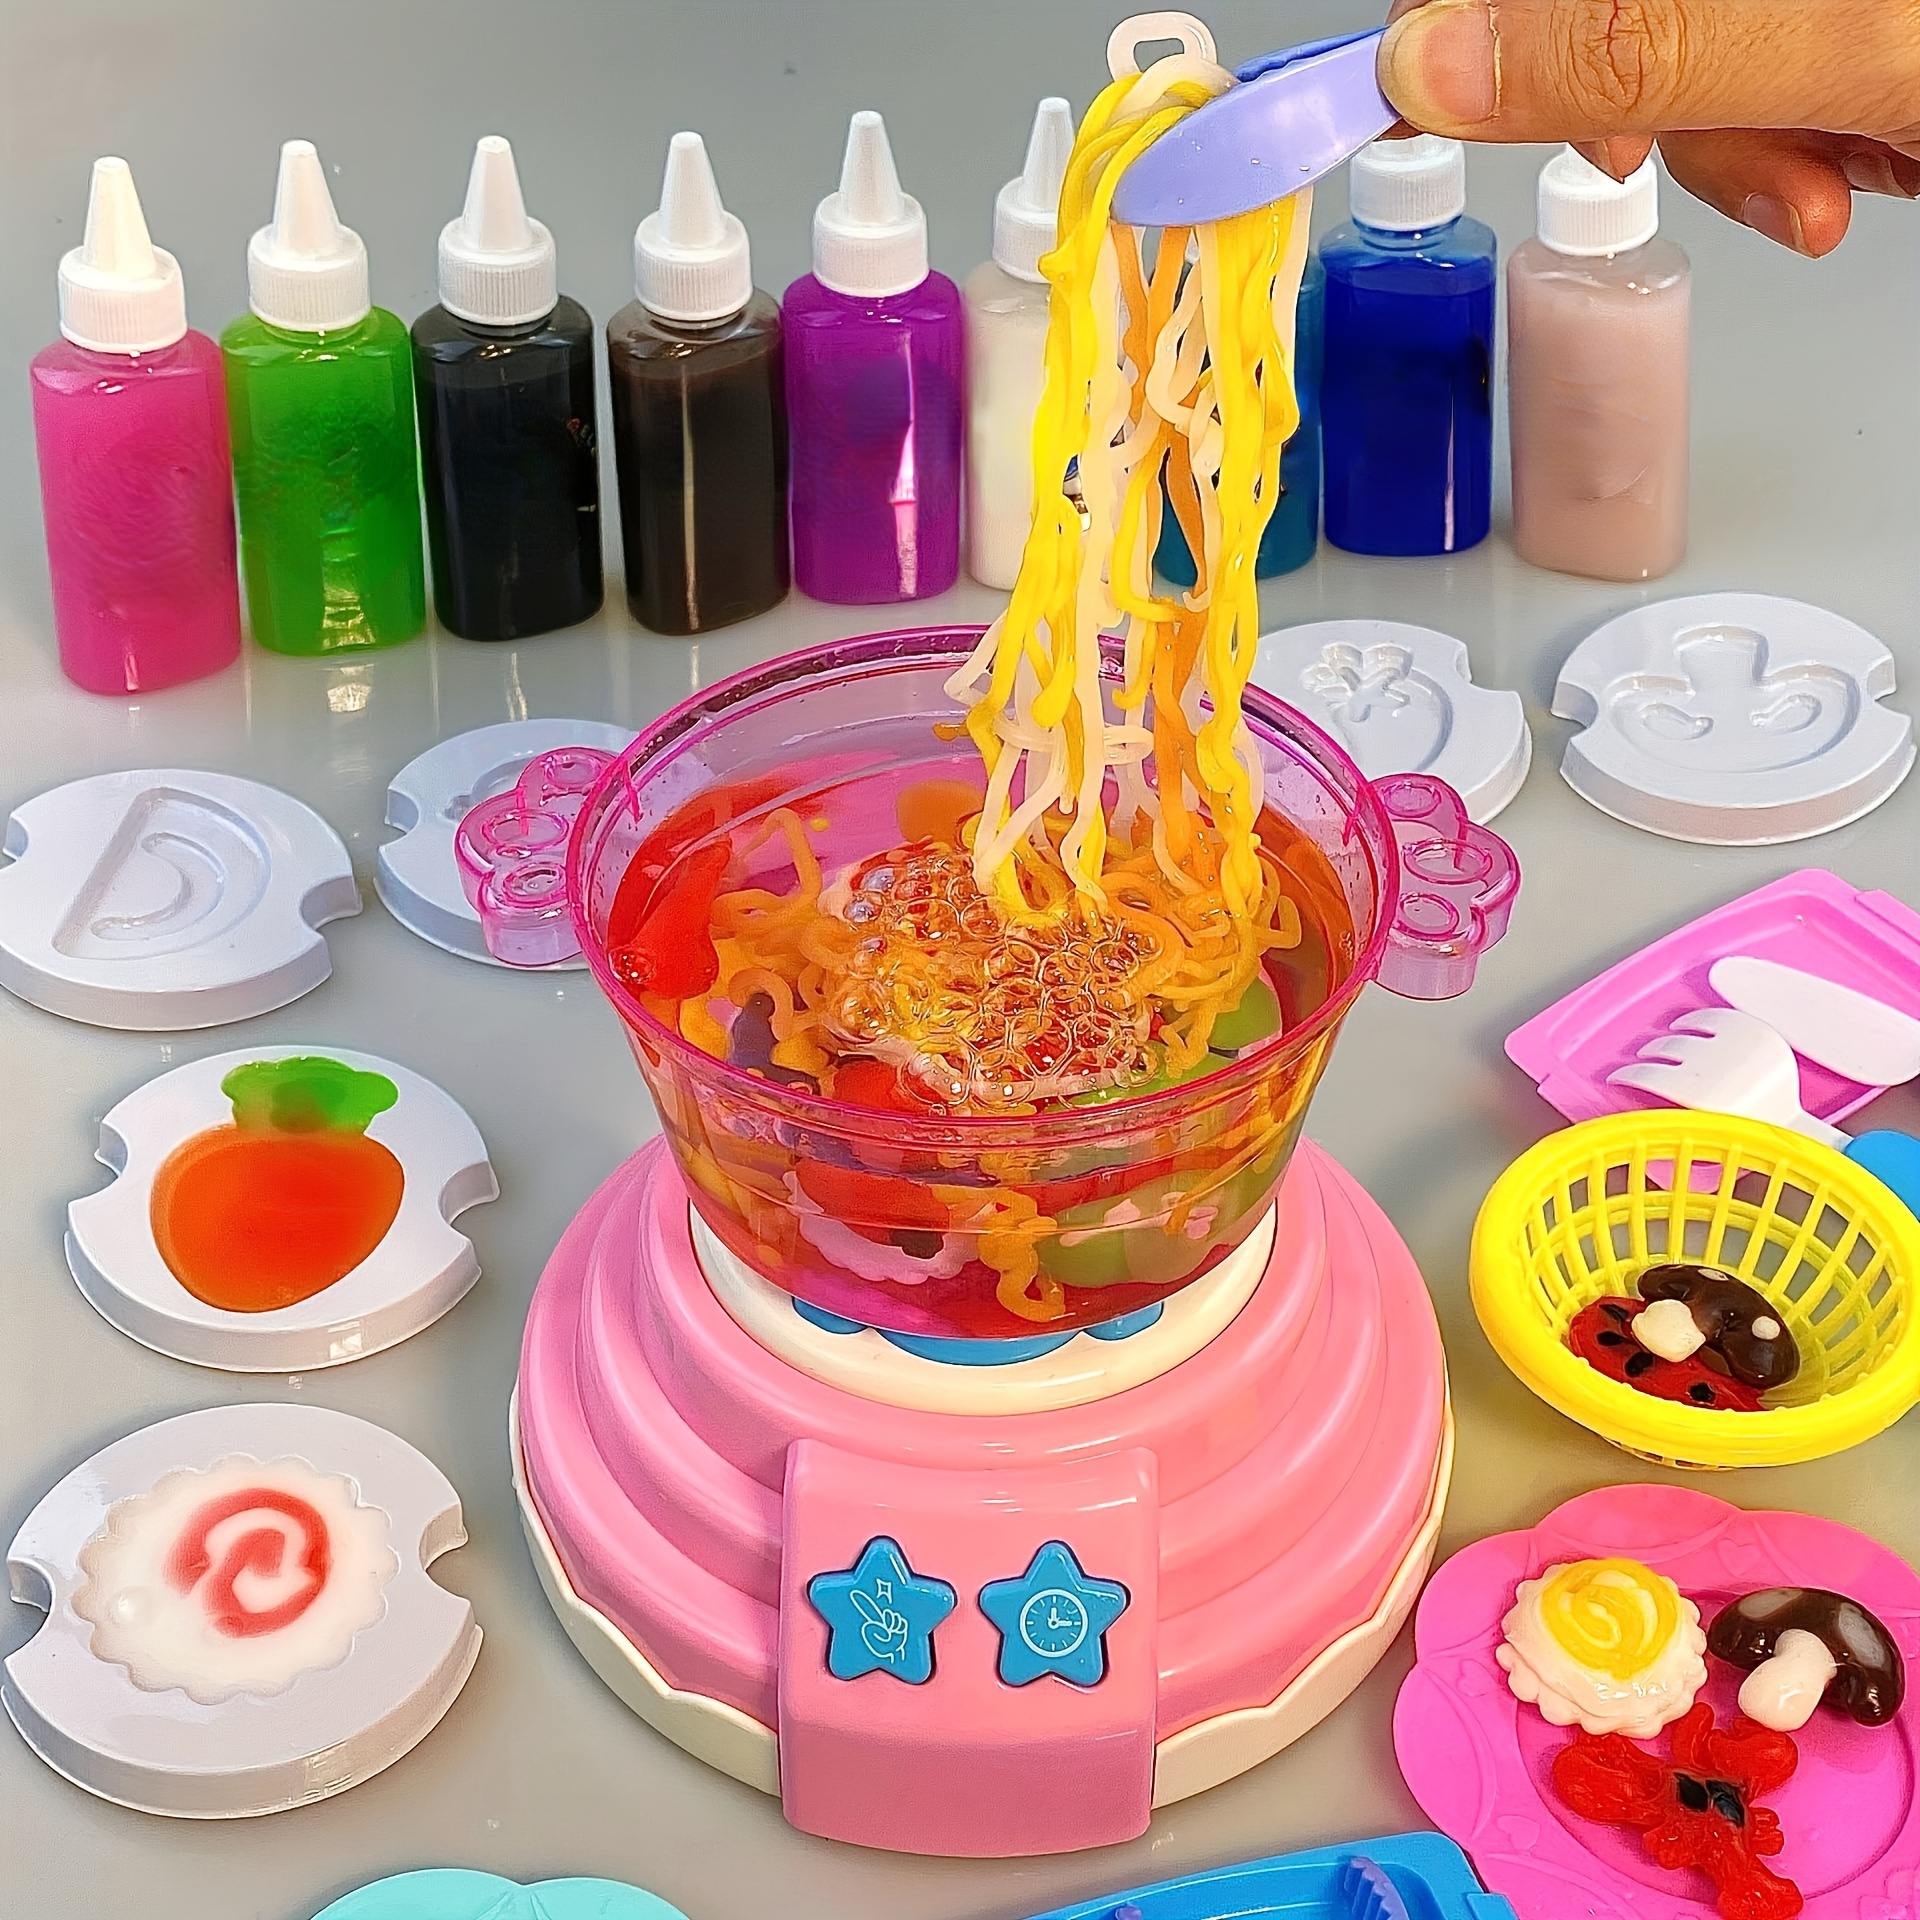 

Magic Water Set Water Baby Hot Pot Machine Handmade Diy Educational Toys 3 Second Demolding Creative Toy Easter Day Birthday Gift